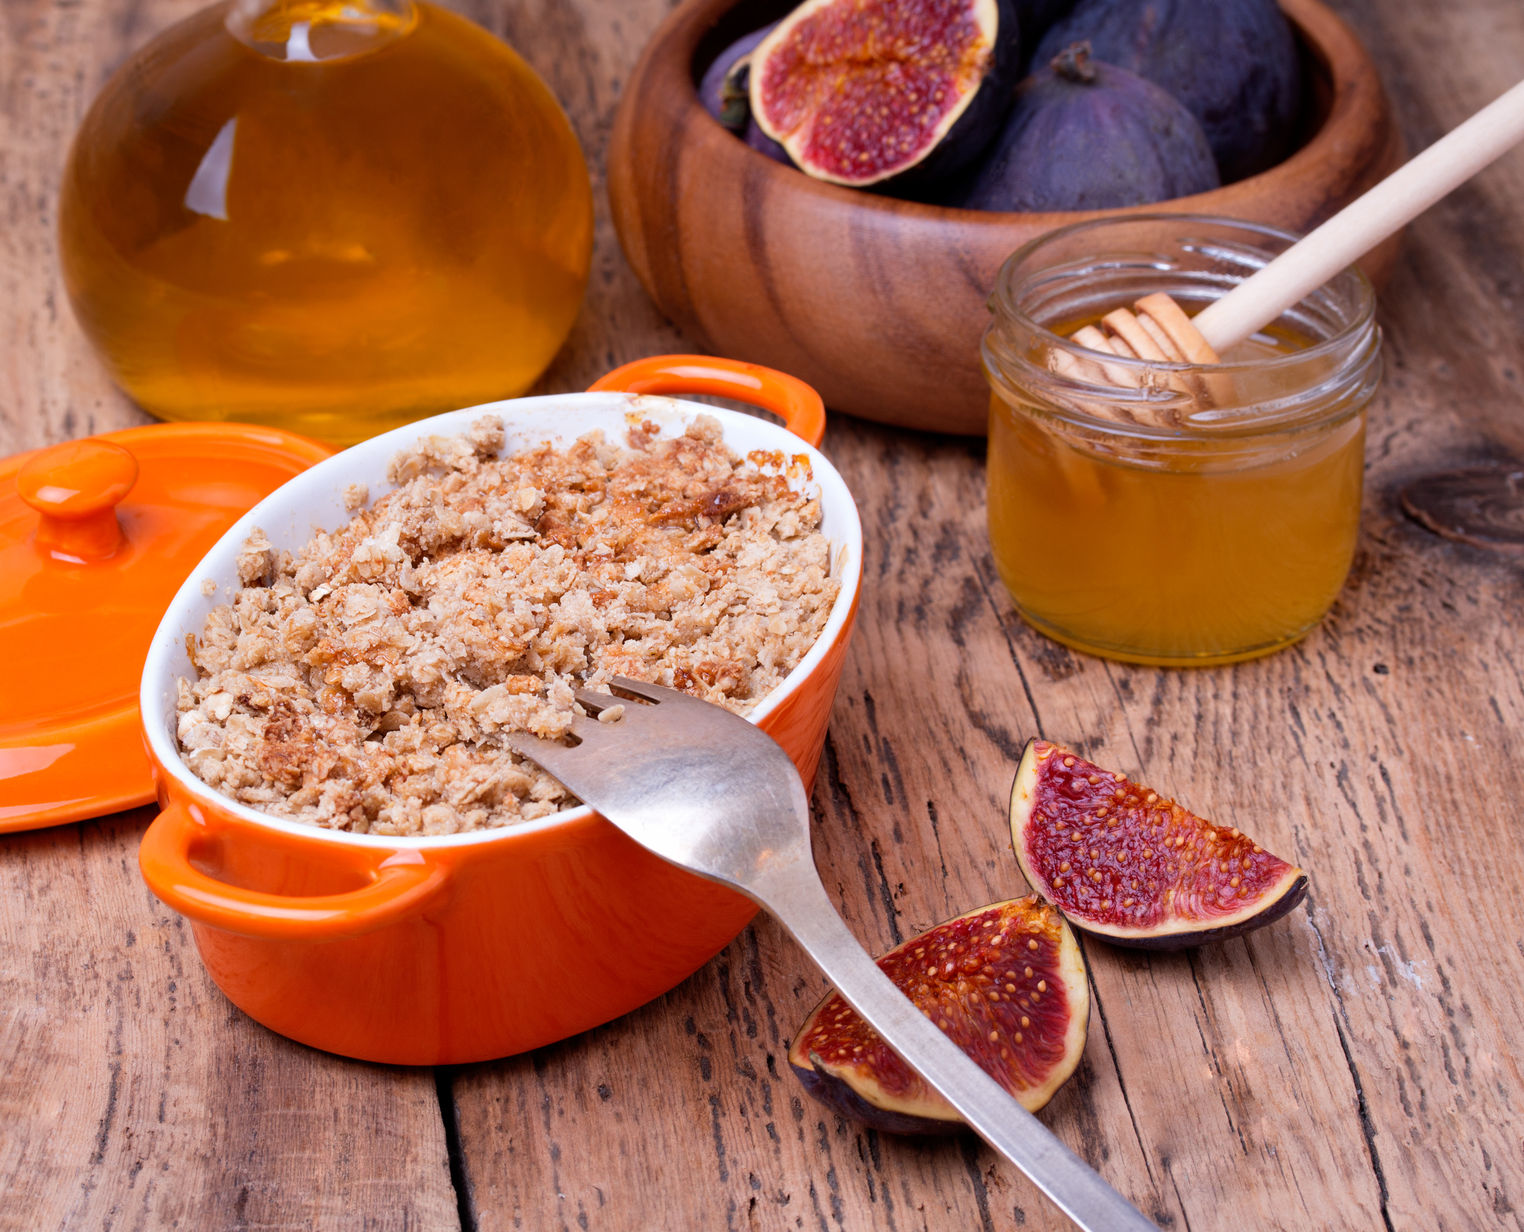 32337930 - apple and figs crumble in orange ceramic dish with honey on wooden background